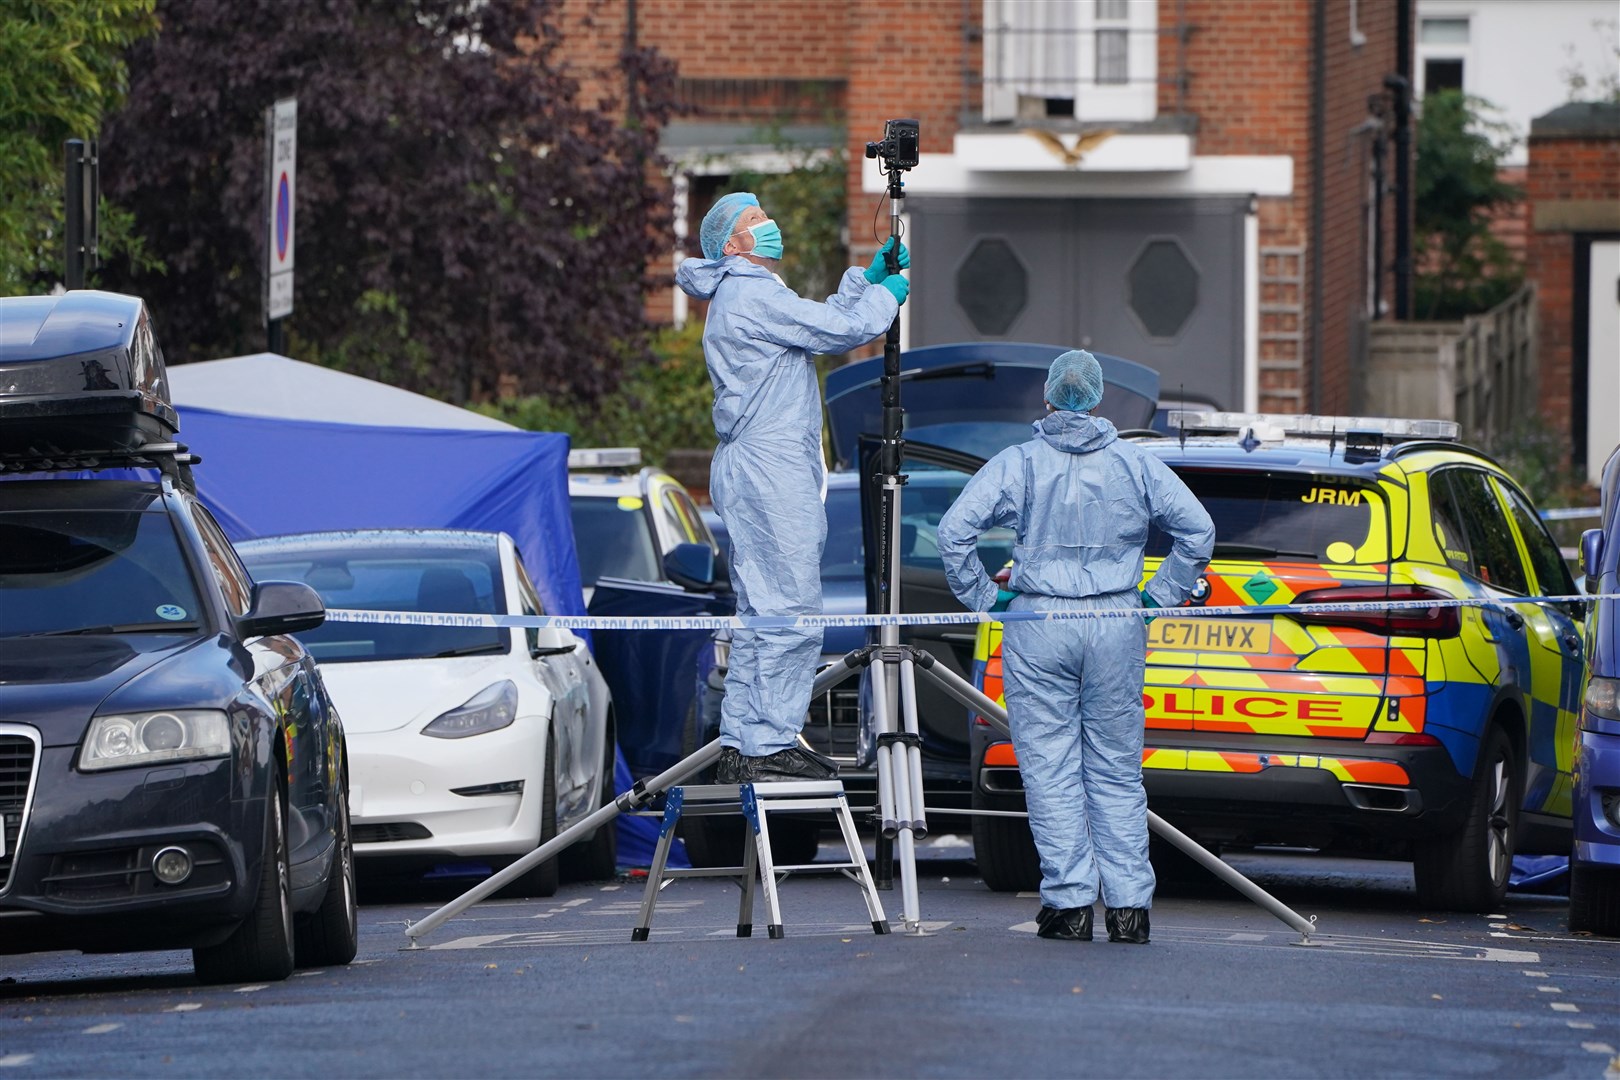 Forensic teams were working at the scene in Streatham Hill on Tuesday (Jonathan Brady/PA)